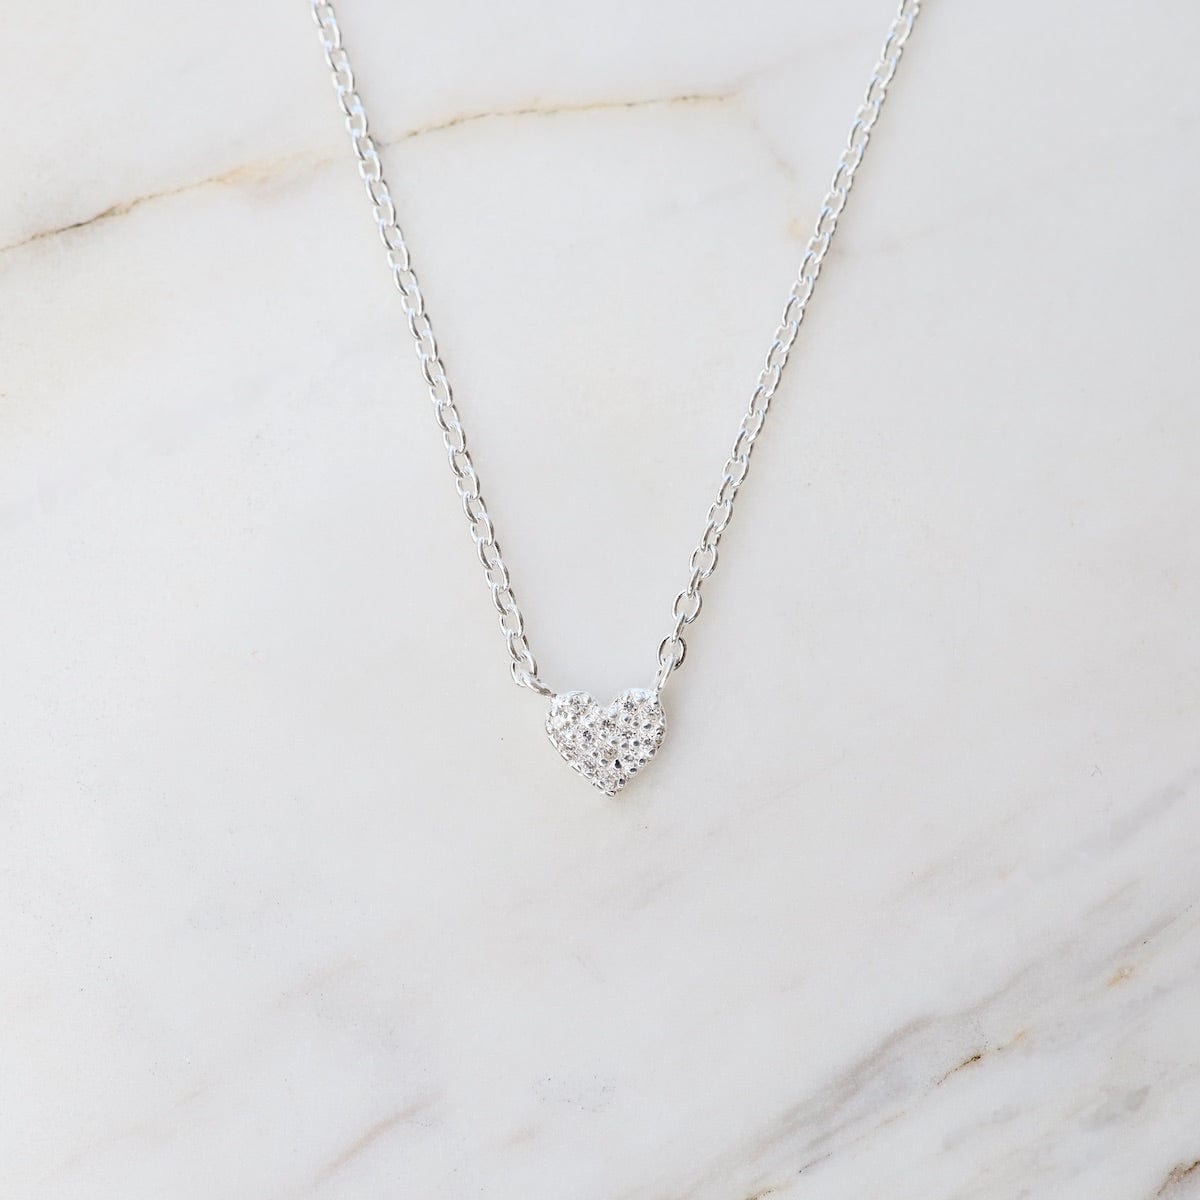 NKL Very Tiny Pave Heart Necklace in Sterling Silver